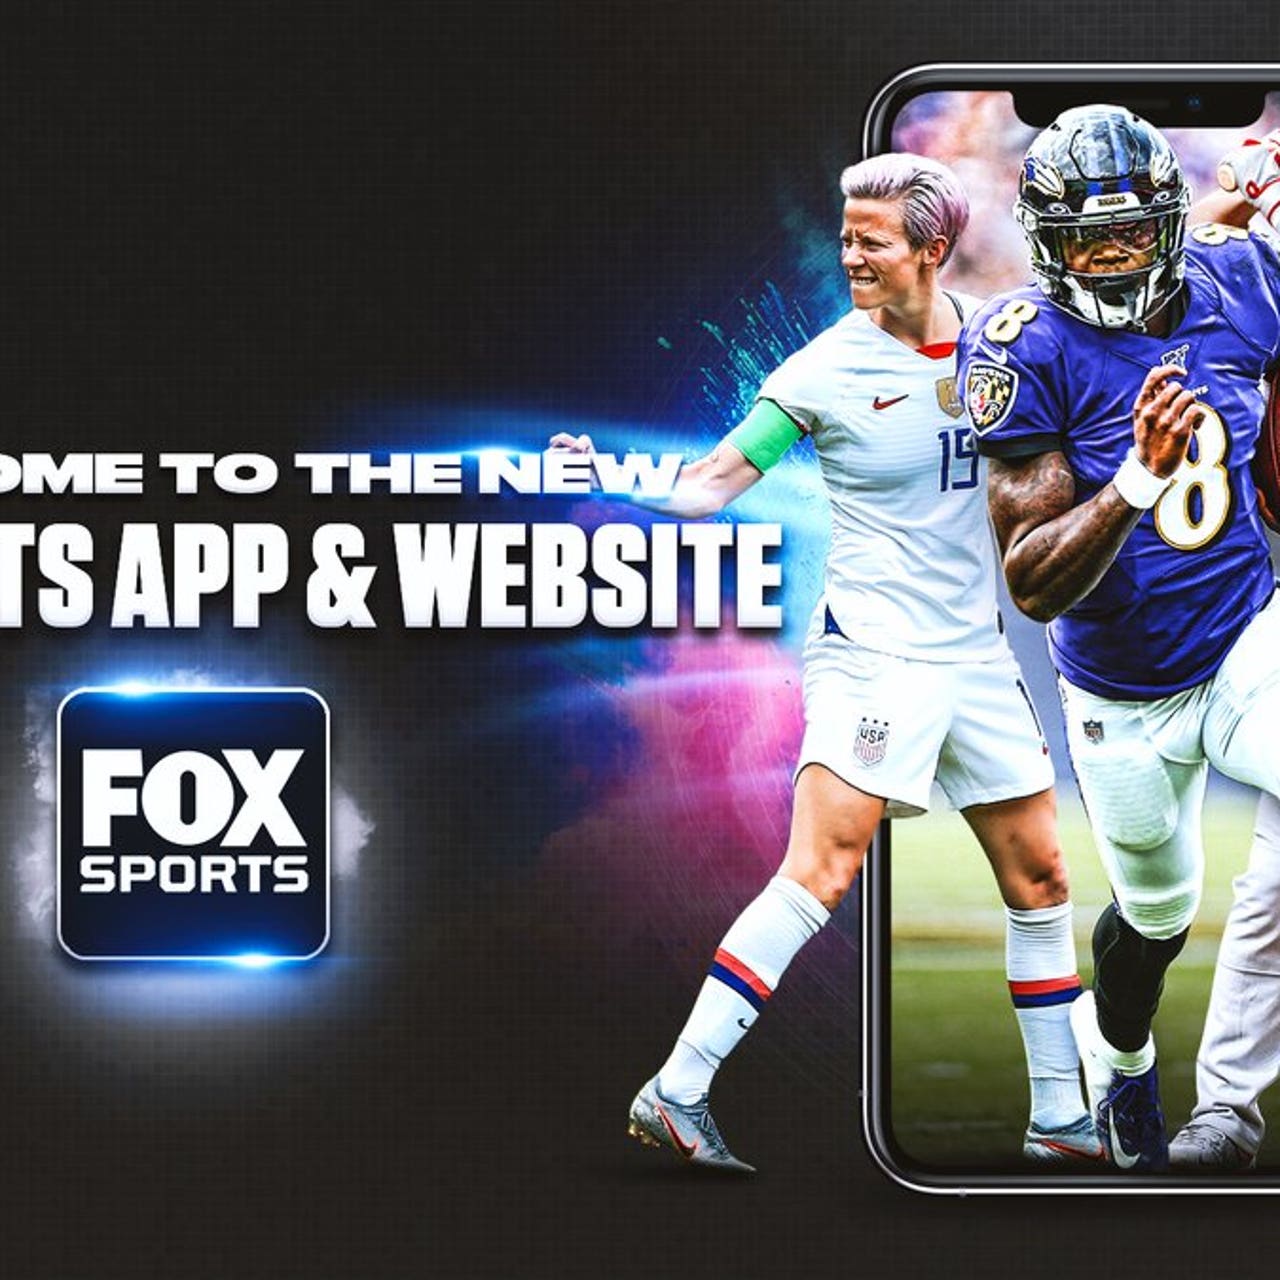 Welcome to the New FOX Sports!